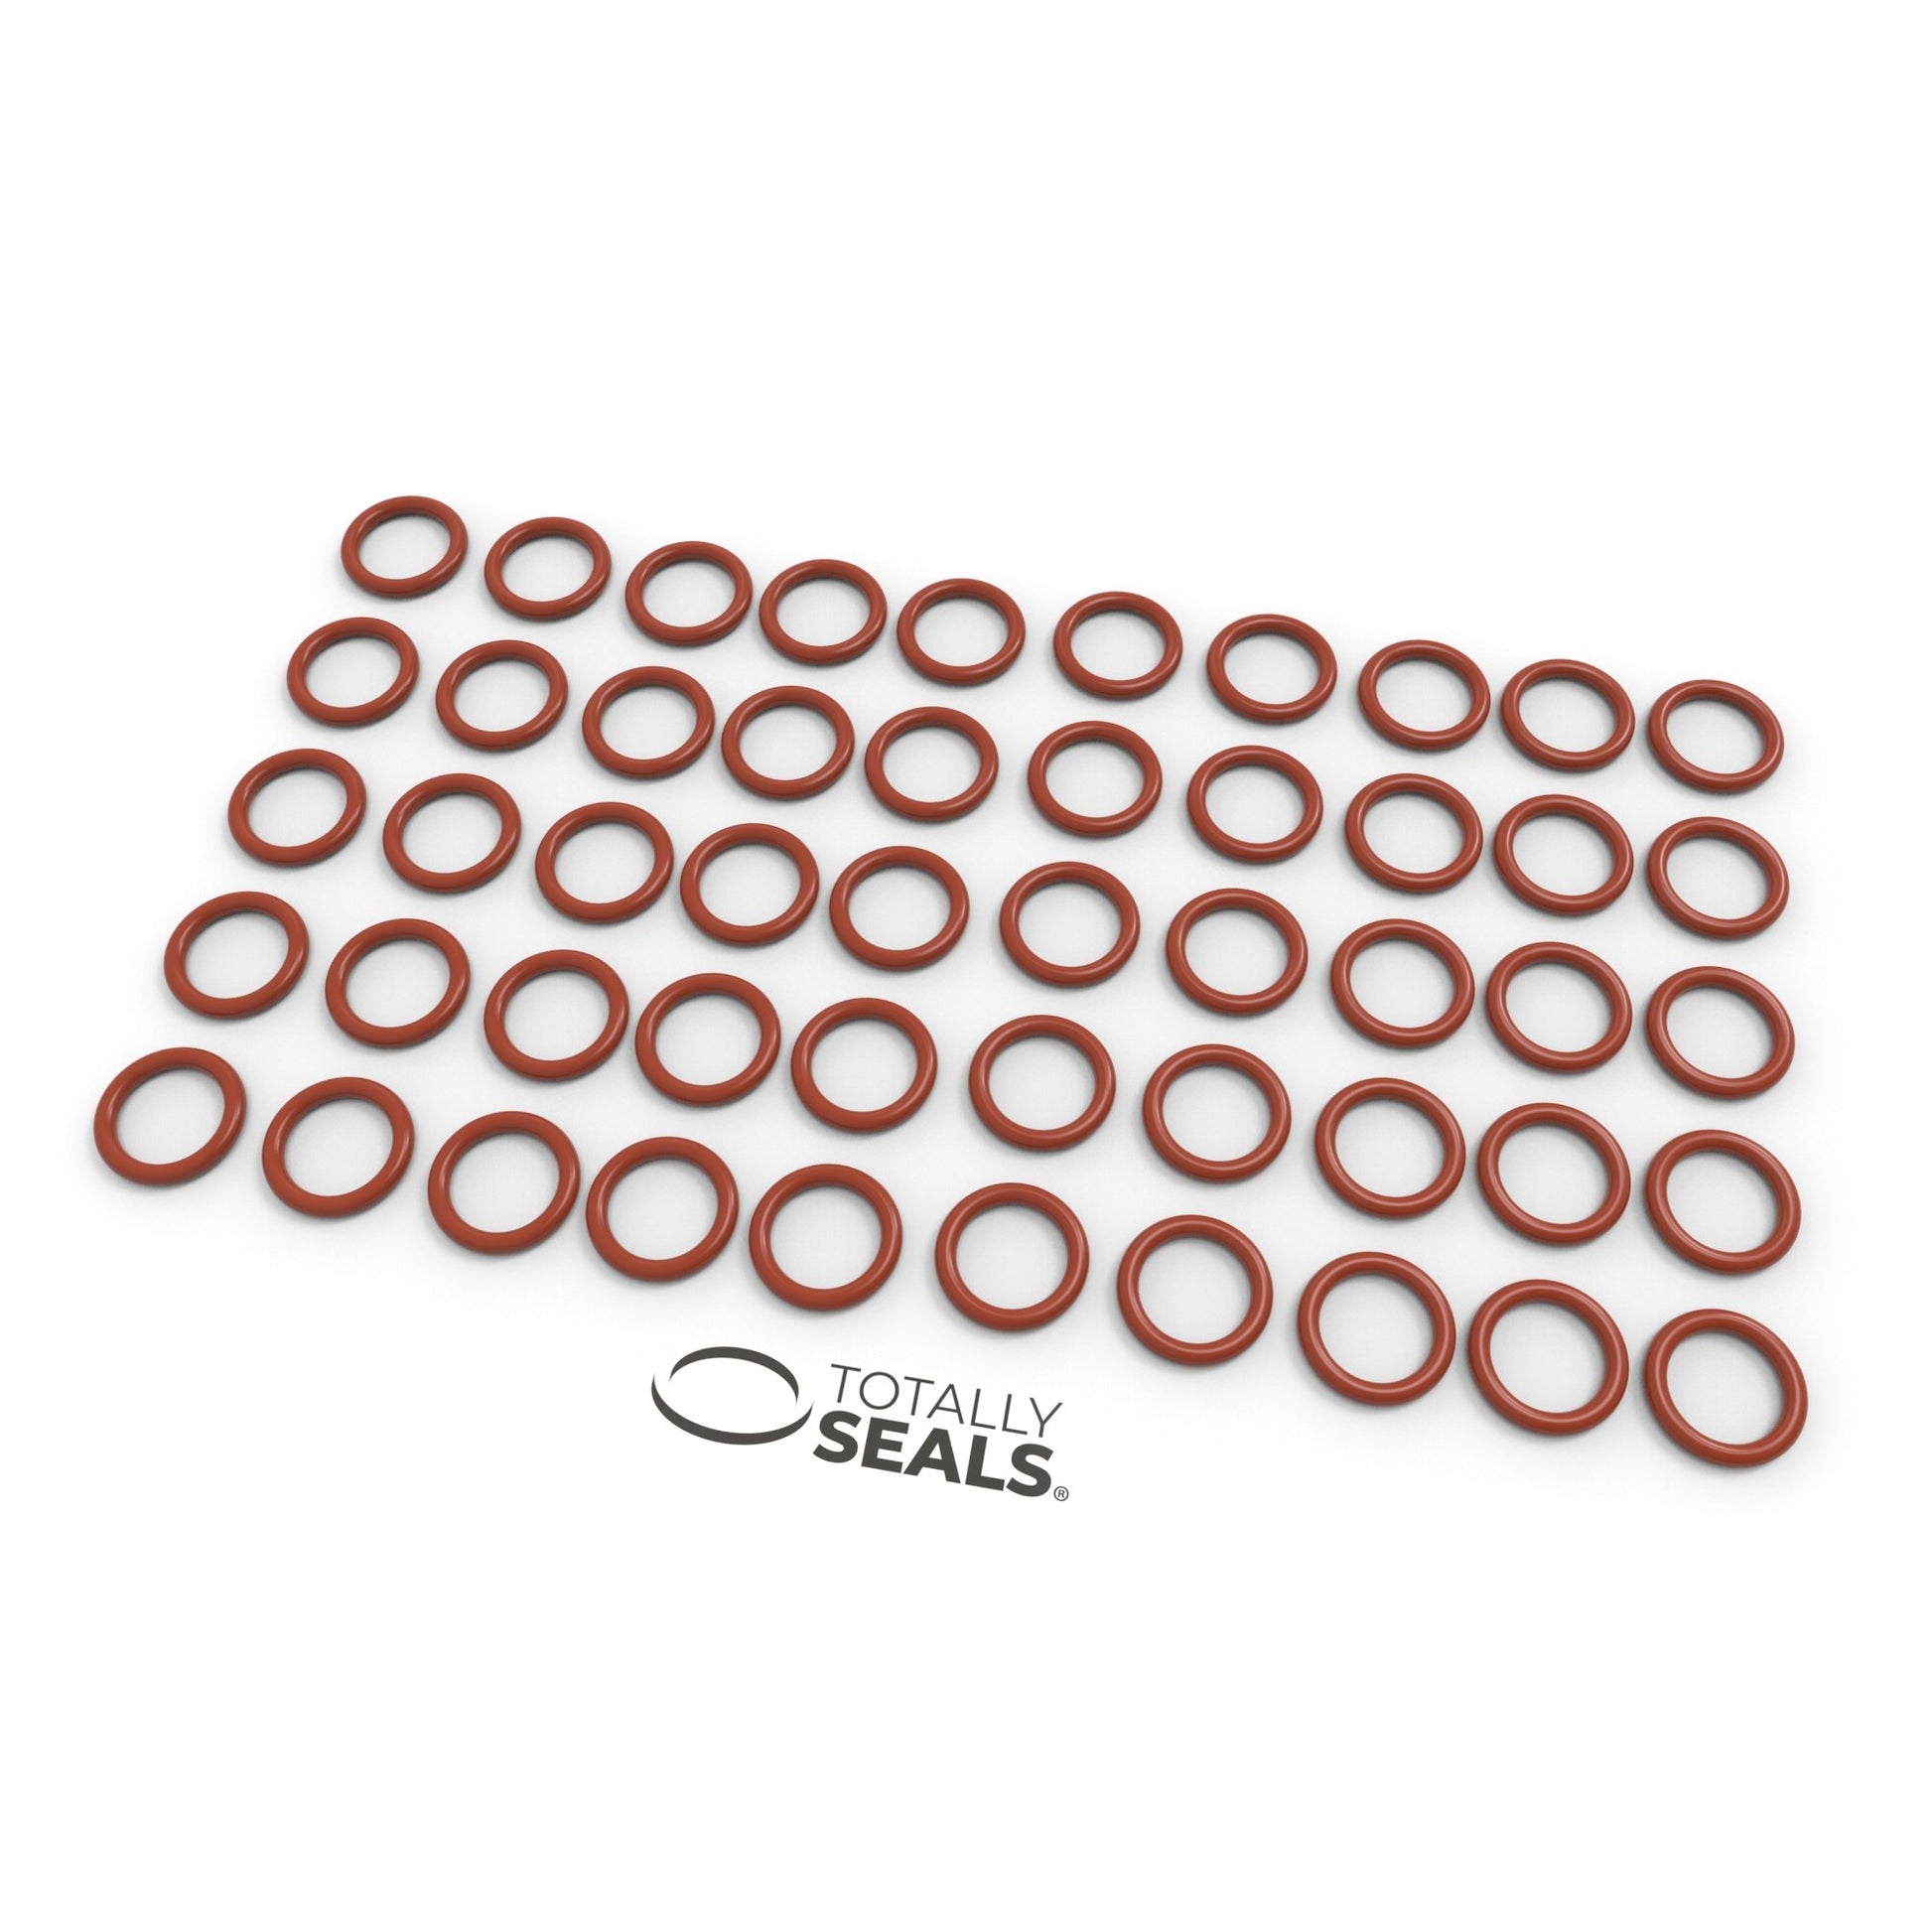 13mm x 2mm (17mm OD) Silicone O-Rings - Totally Seals®